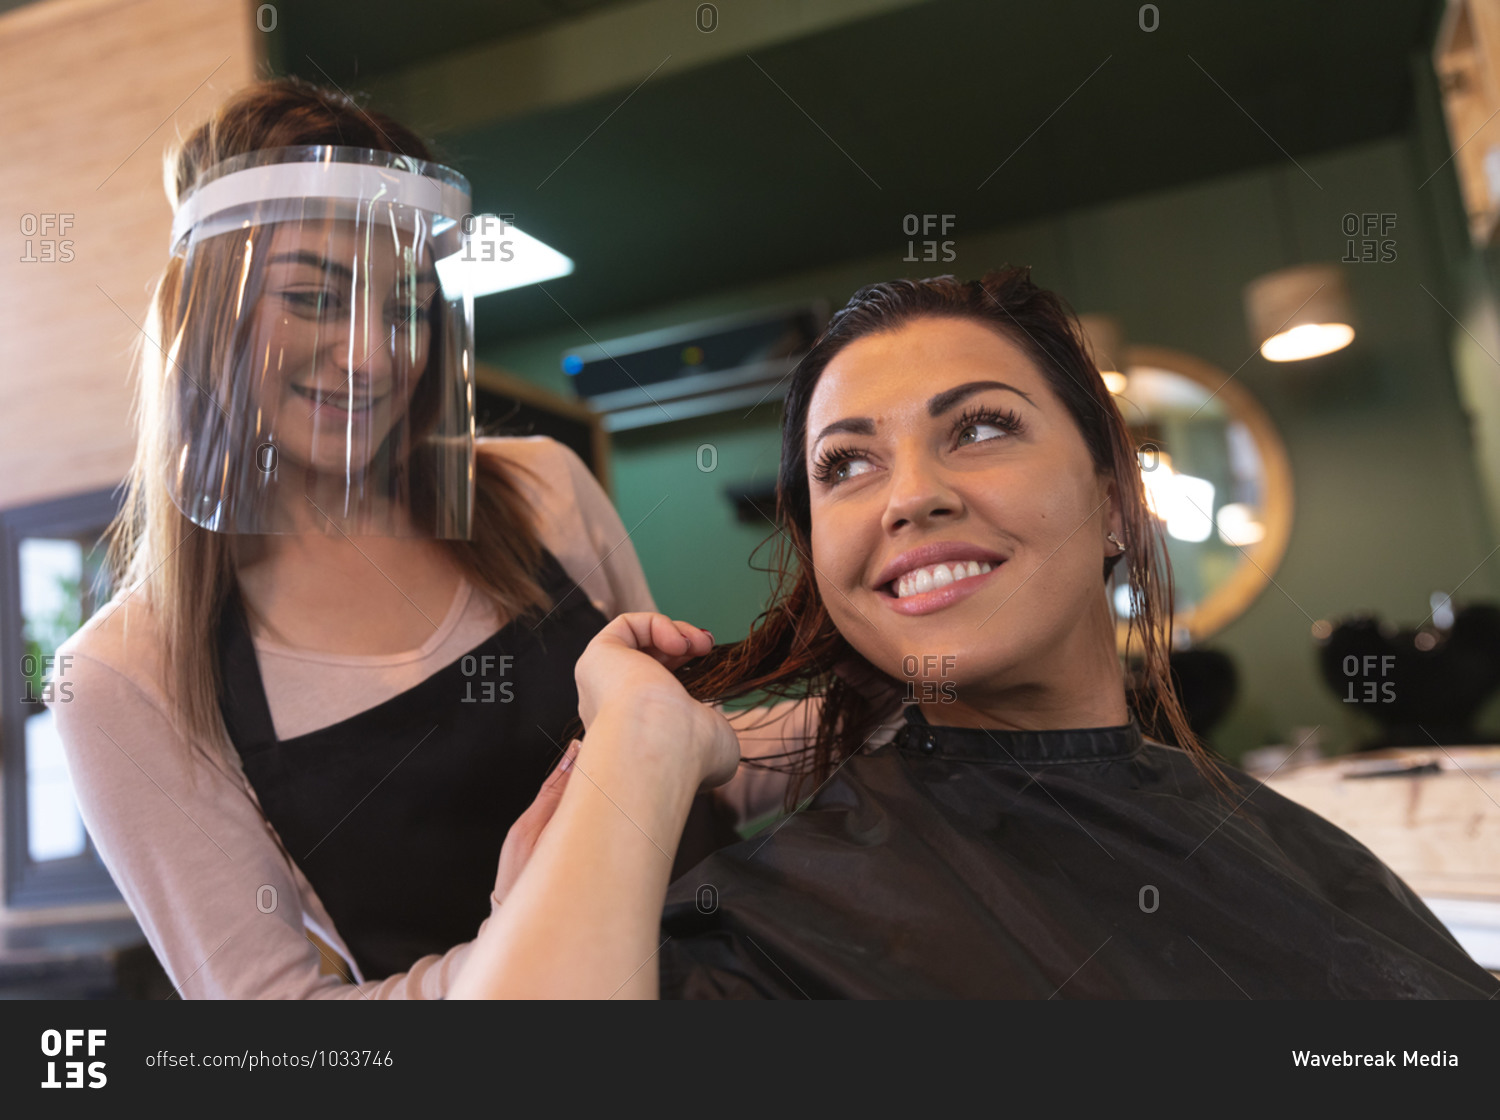 Caucasian female hairdresser working in hair salon wearing face cover, combing hair of female Caucasian customer smiling. Health and hygiene in workplace during Coronavirus Covid 19 pandemic.